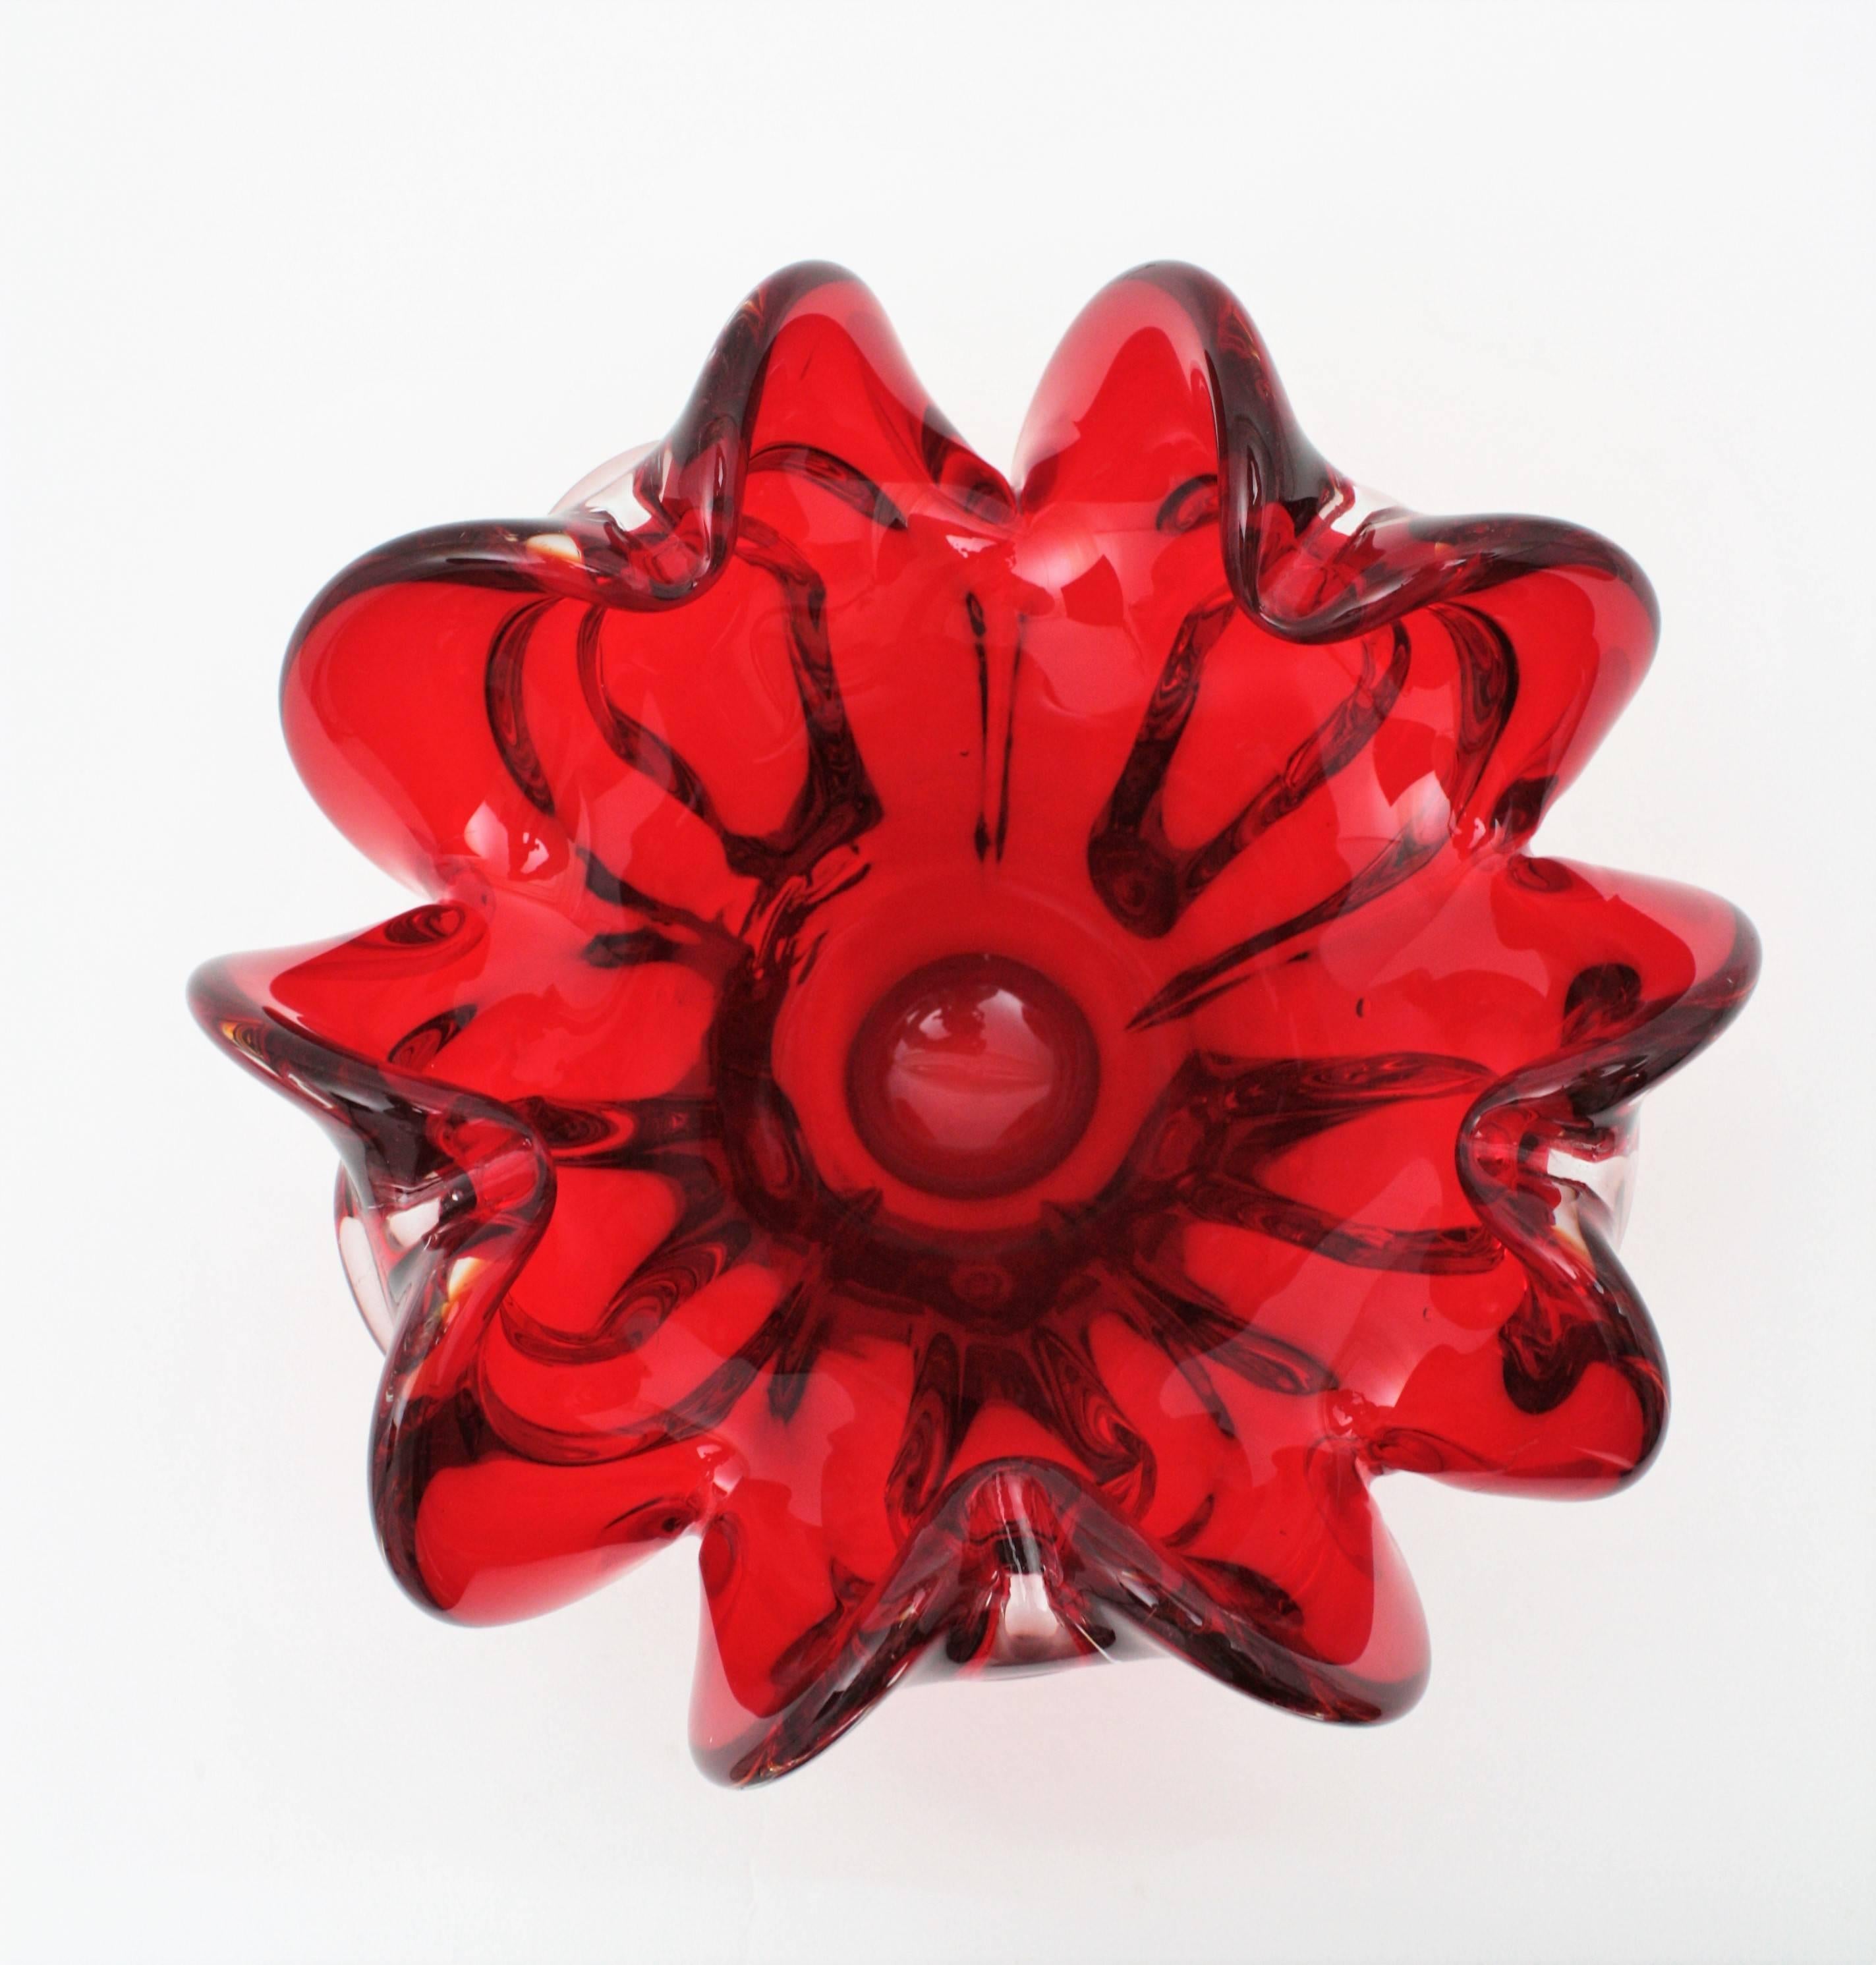 Italian Large Archimede Seguso Murano Ruby Red Sommerso Art Glass Centerpiece Bowl